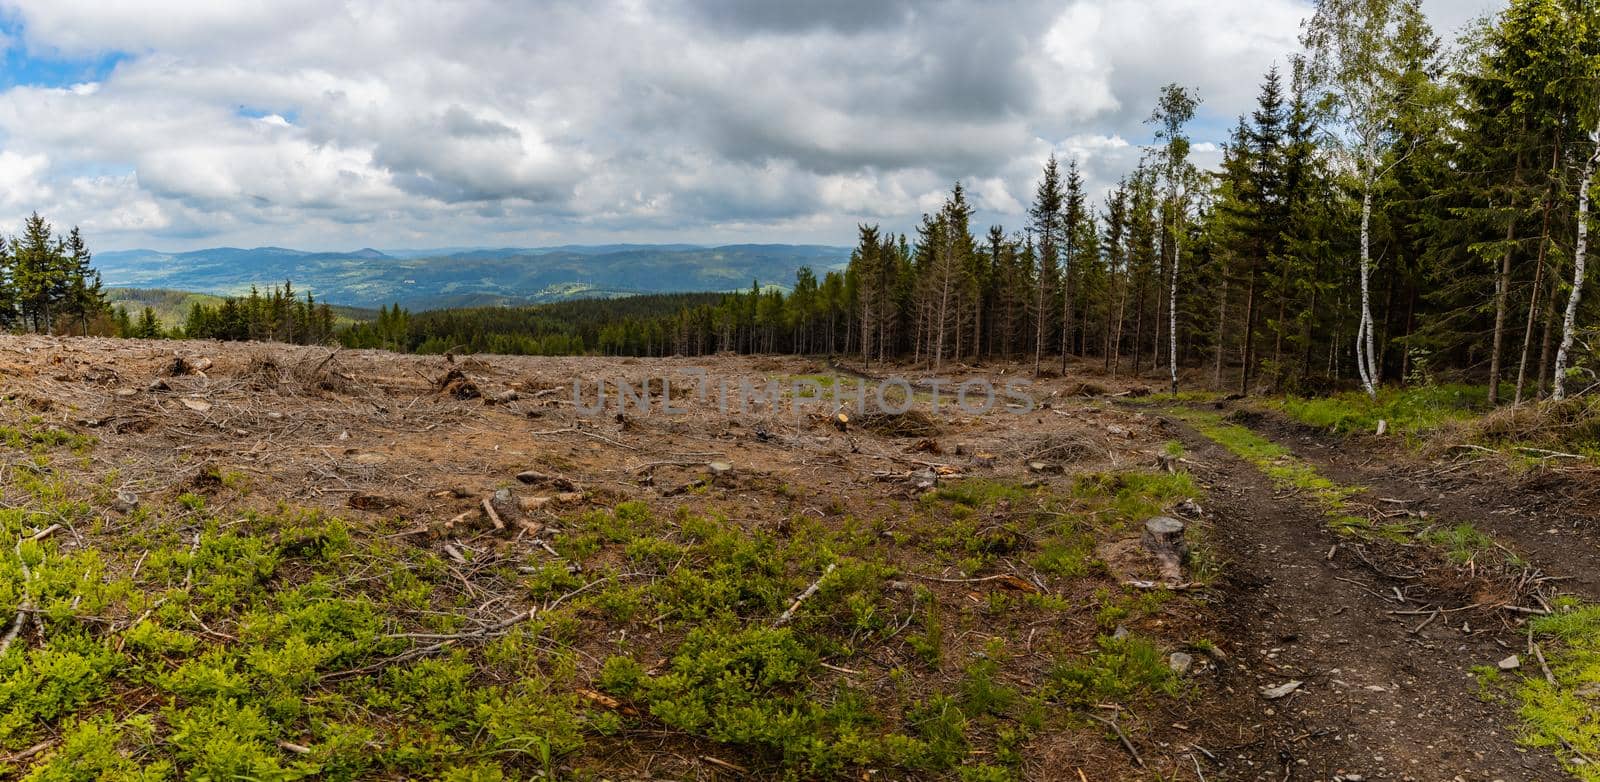 Panorama of Rudawy Janowickie mountains with small glade with felled trees  by Wierzchu